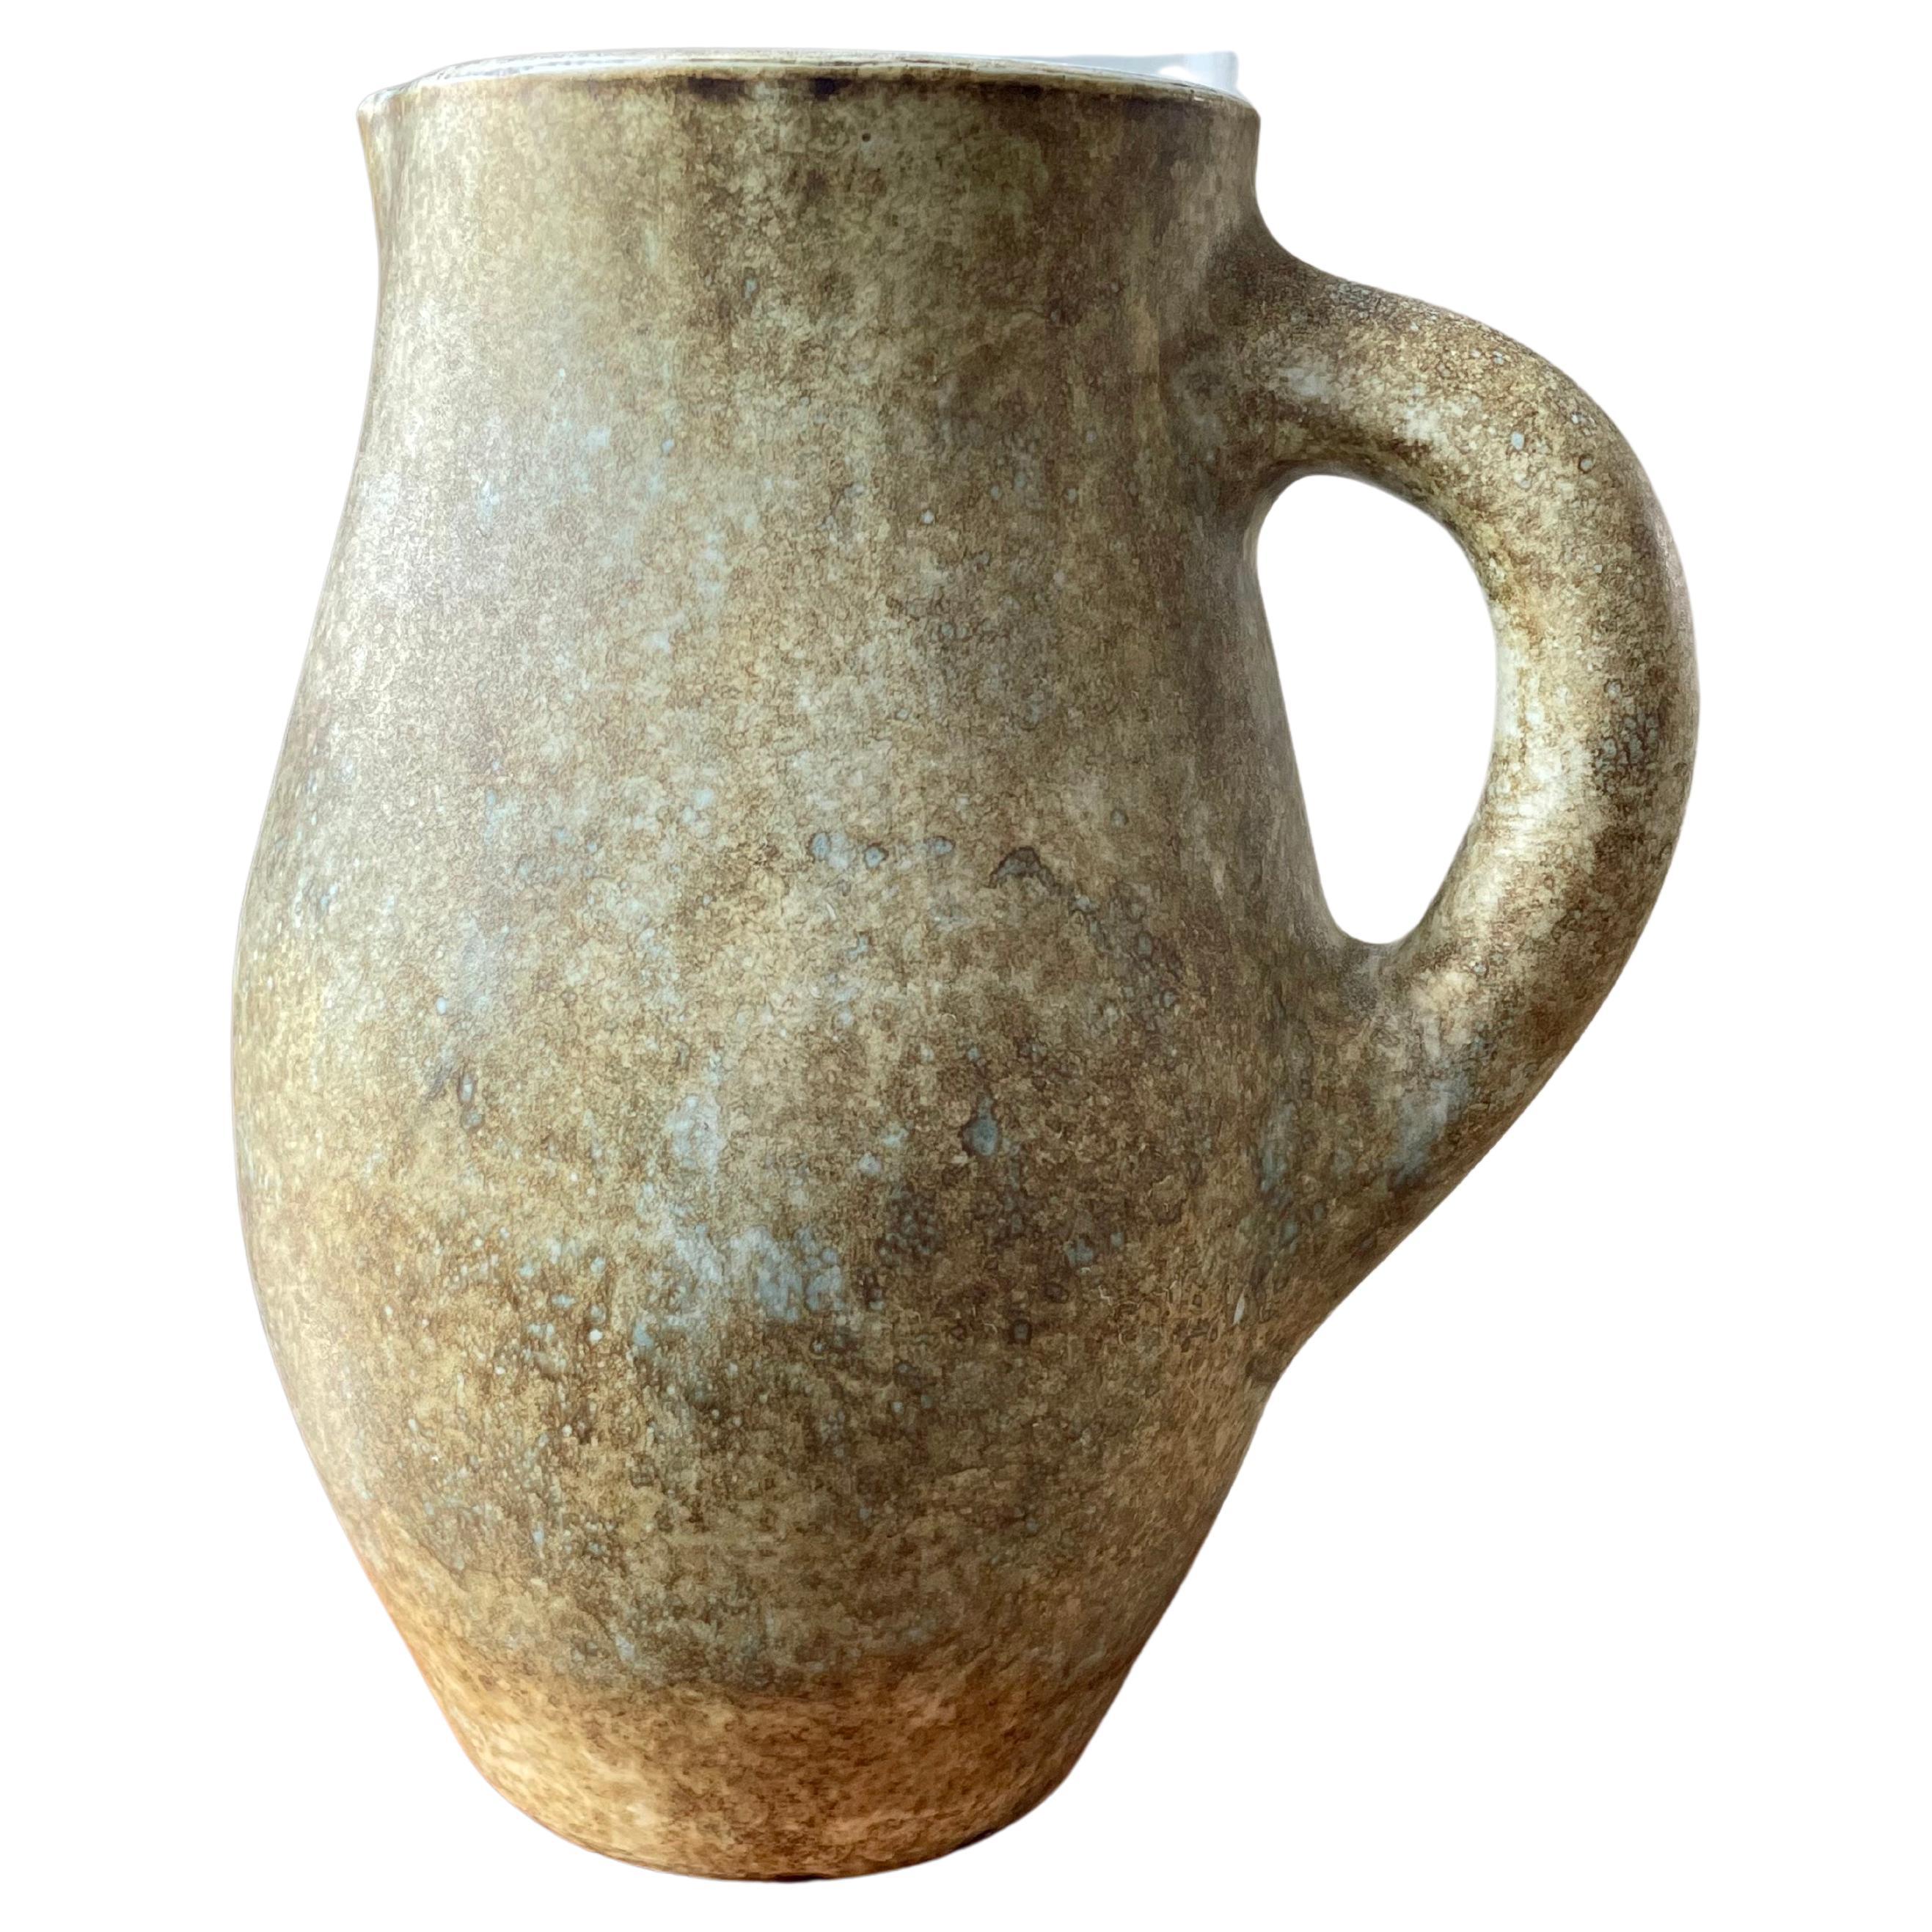 Ceramic pitcher by Jacques and Michelle Serre, Les 2 potiers, circa 1950 For Sale